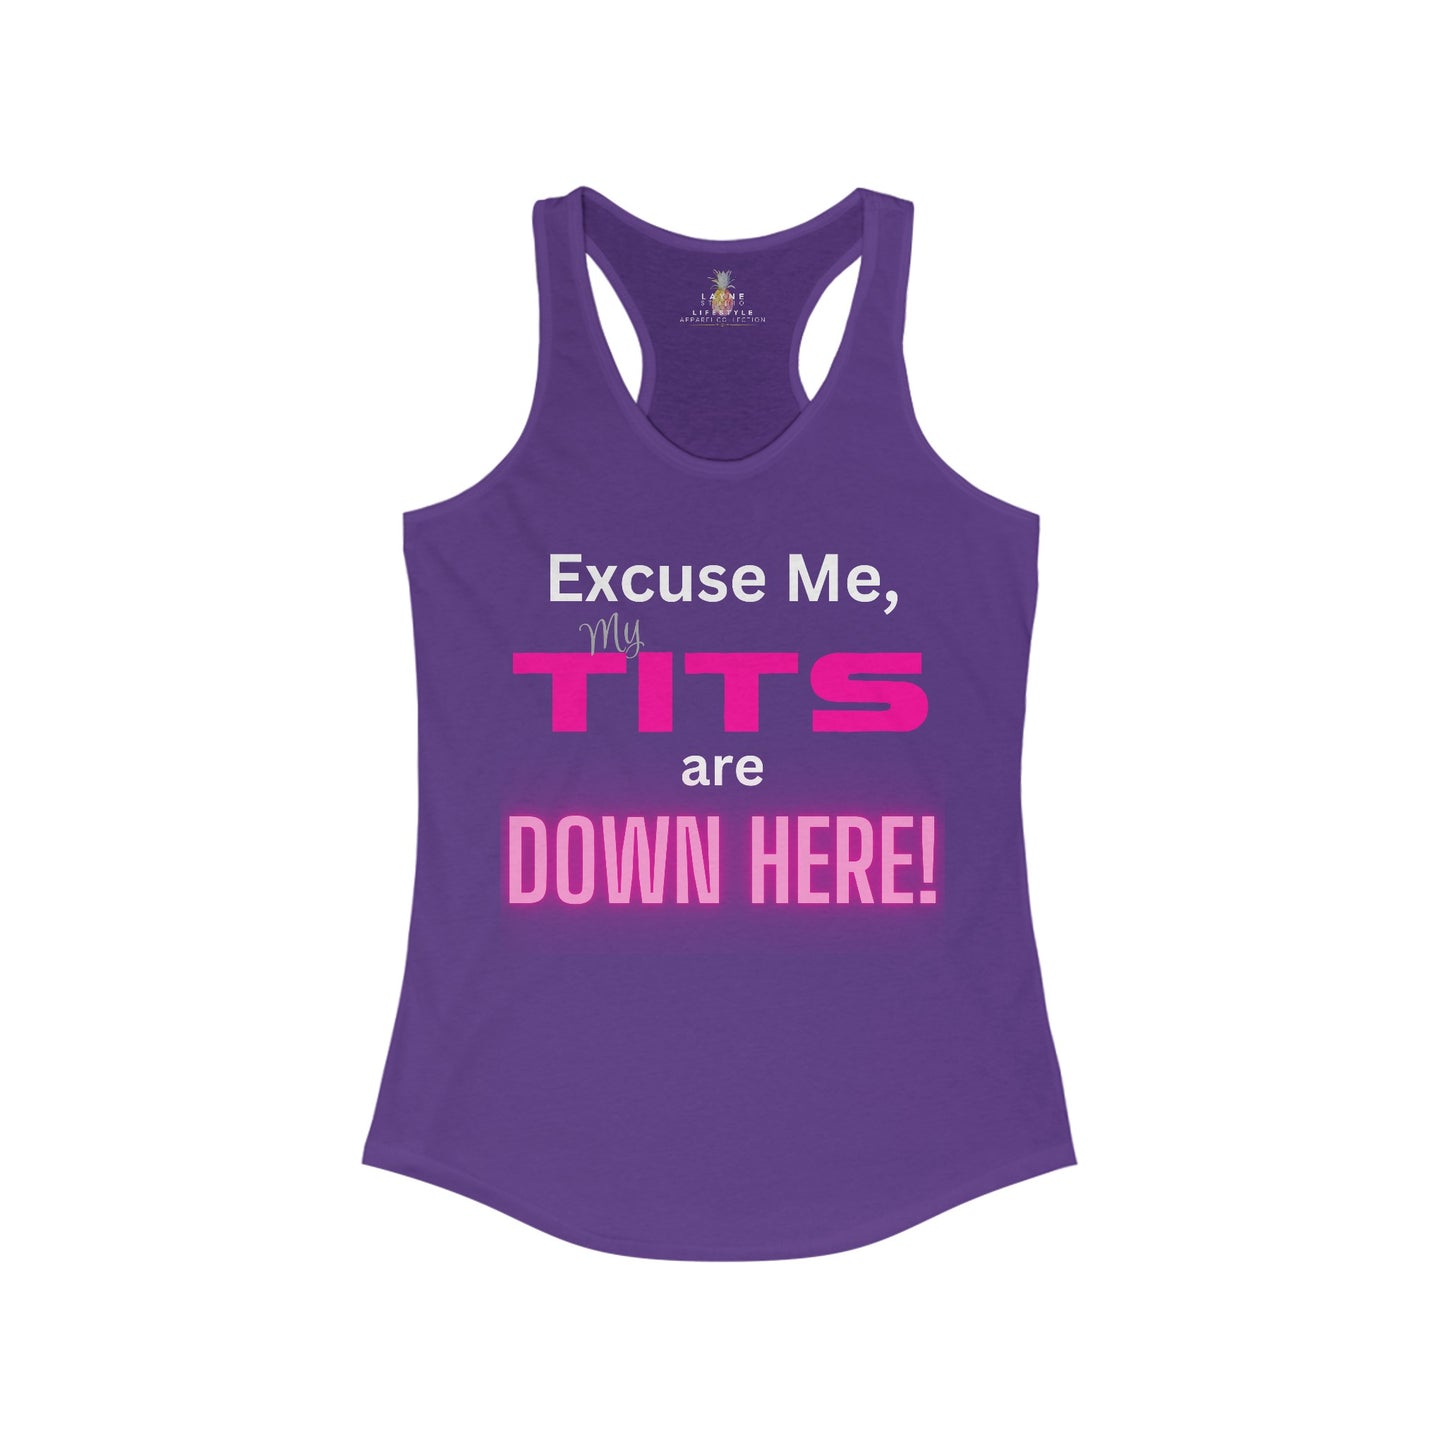 Front View of Layne Studios "Excuse Me, My Tits Are Down Here!" Graphic Solid Purple Rush Racerback Tank-Top